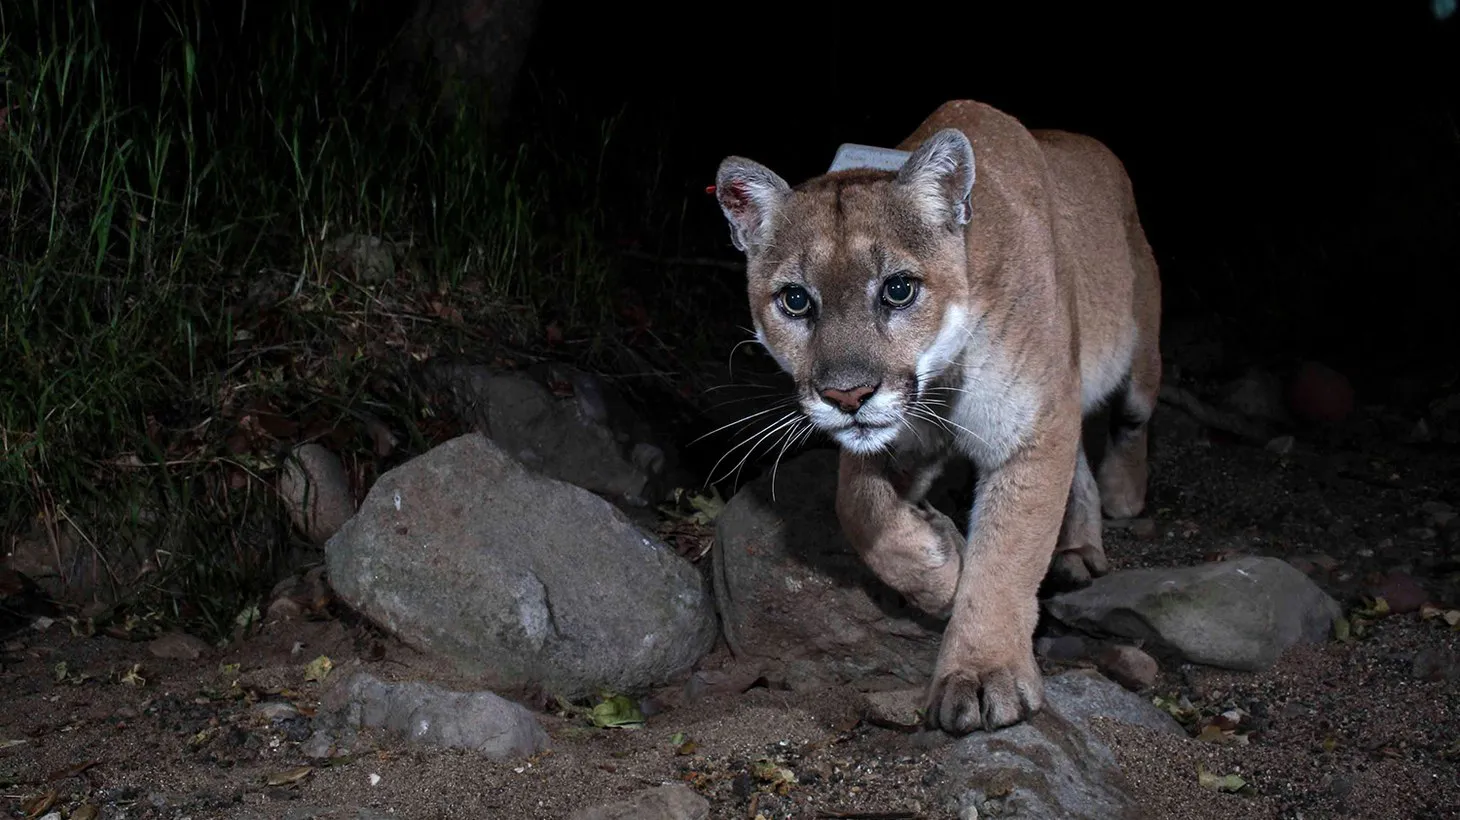 P-22, the beloved LA mountain lion, was euthanized over the weekend.